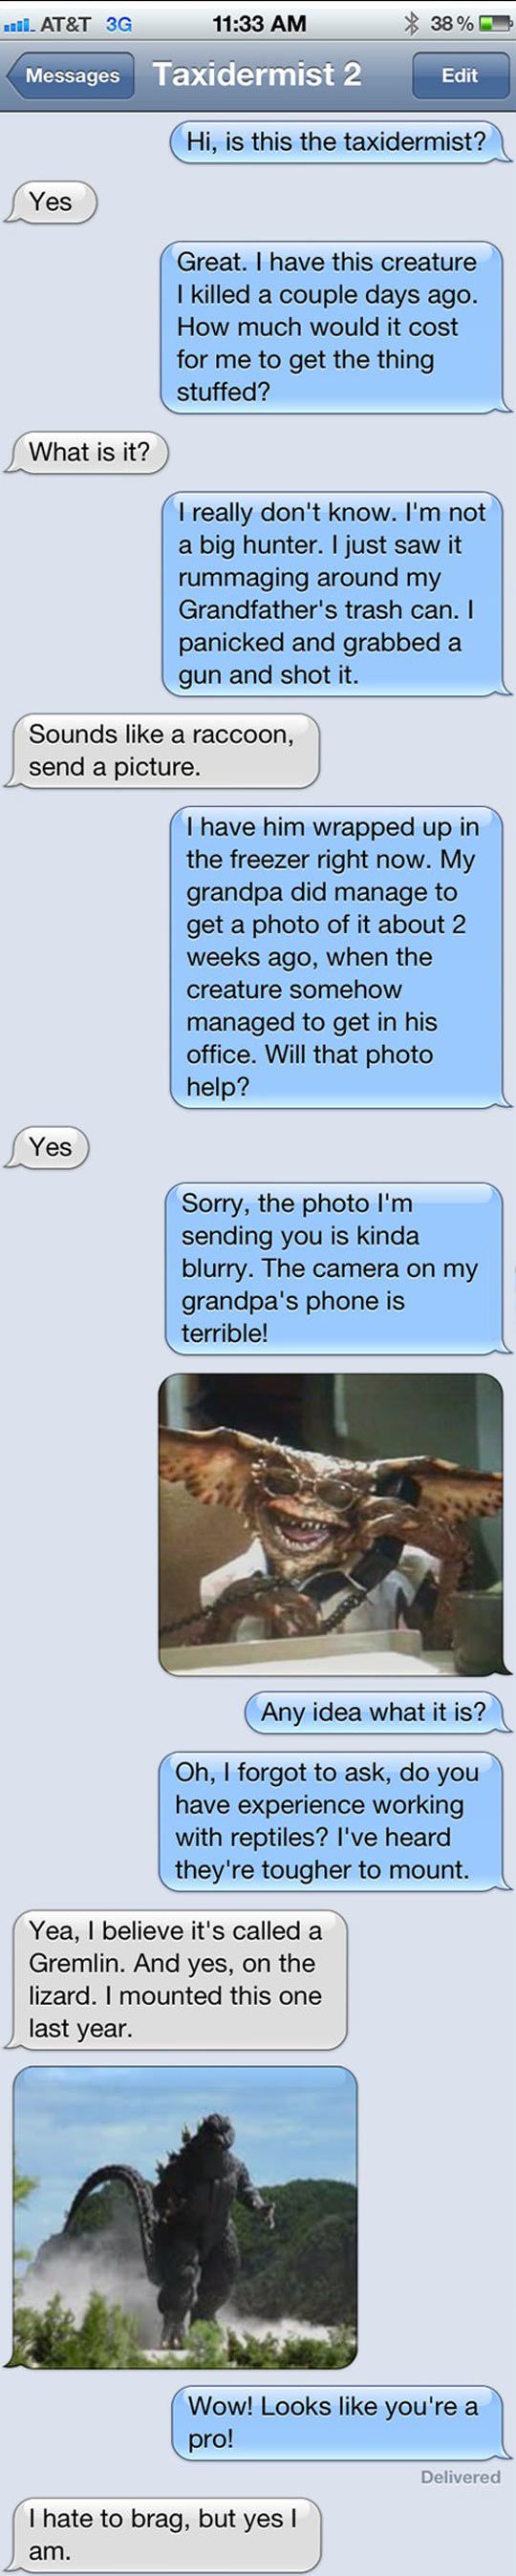 funny craigslist prank texts - mail. At&T 3G Messages Taxidermist 2 38% Edit Hi, is this the taxidermist? Yes Great. I have this creature I killed a couple days ago. How much would it cost for me to get the thing stuffed? What is it? I really don't know. 